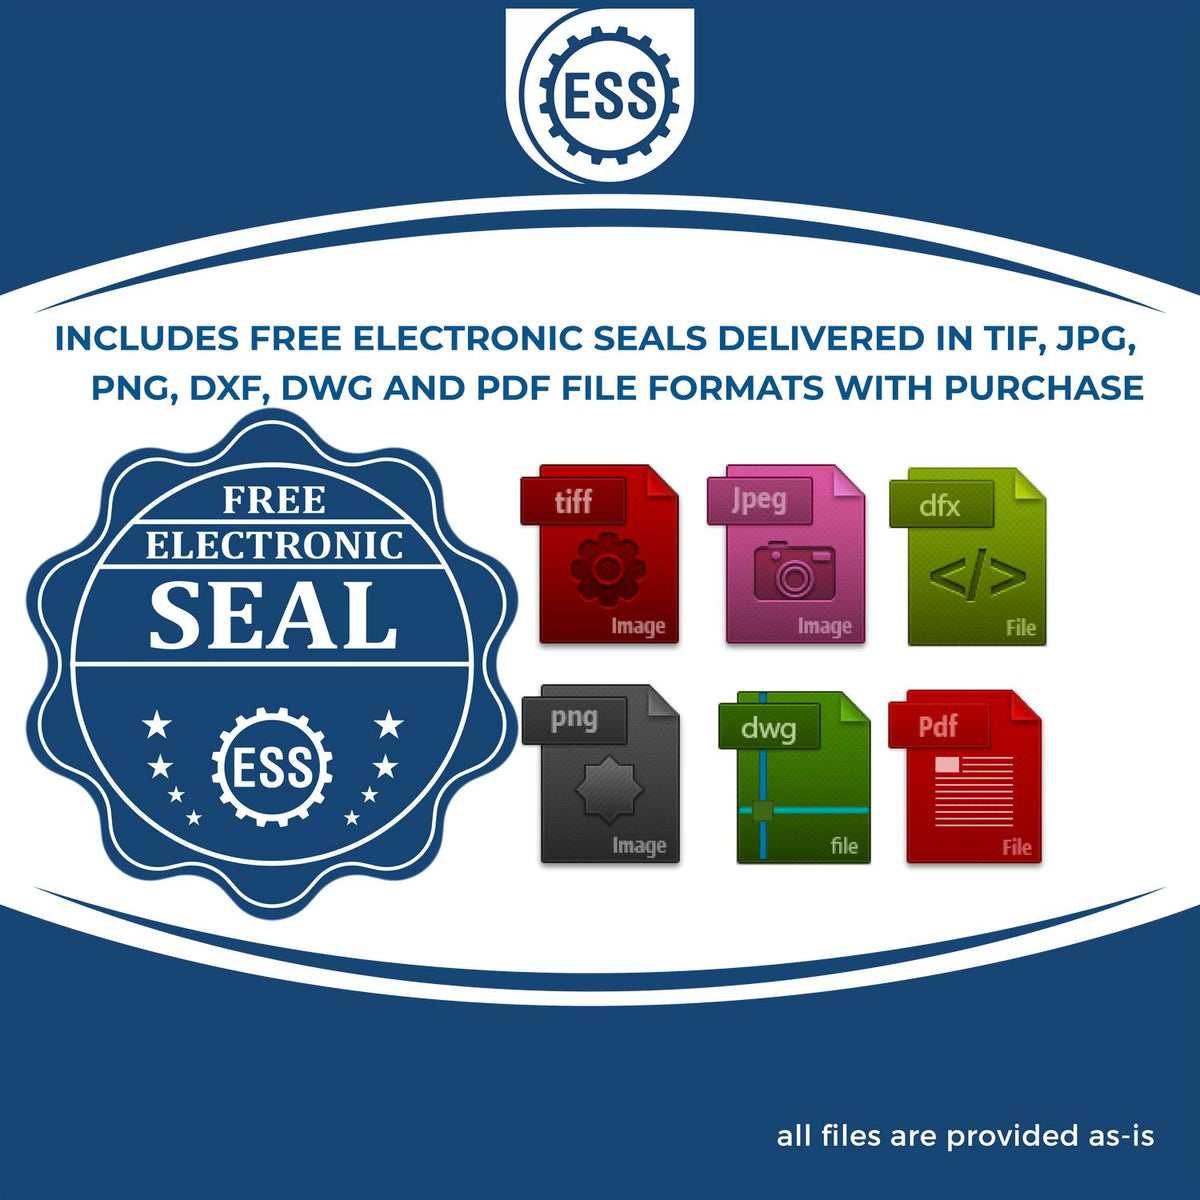 An infographic for the free electronic seal for the Slim Pre-Inked Georgia Professional Engineer Seal Stamp illustrating the different file type icons such as DXF, DWG, TIF, JPG and PNG.